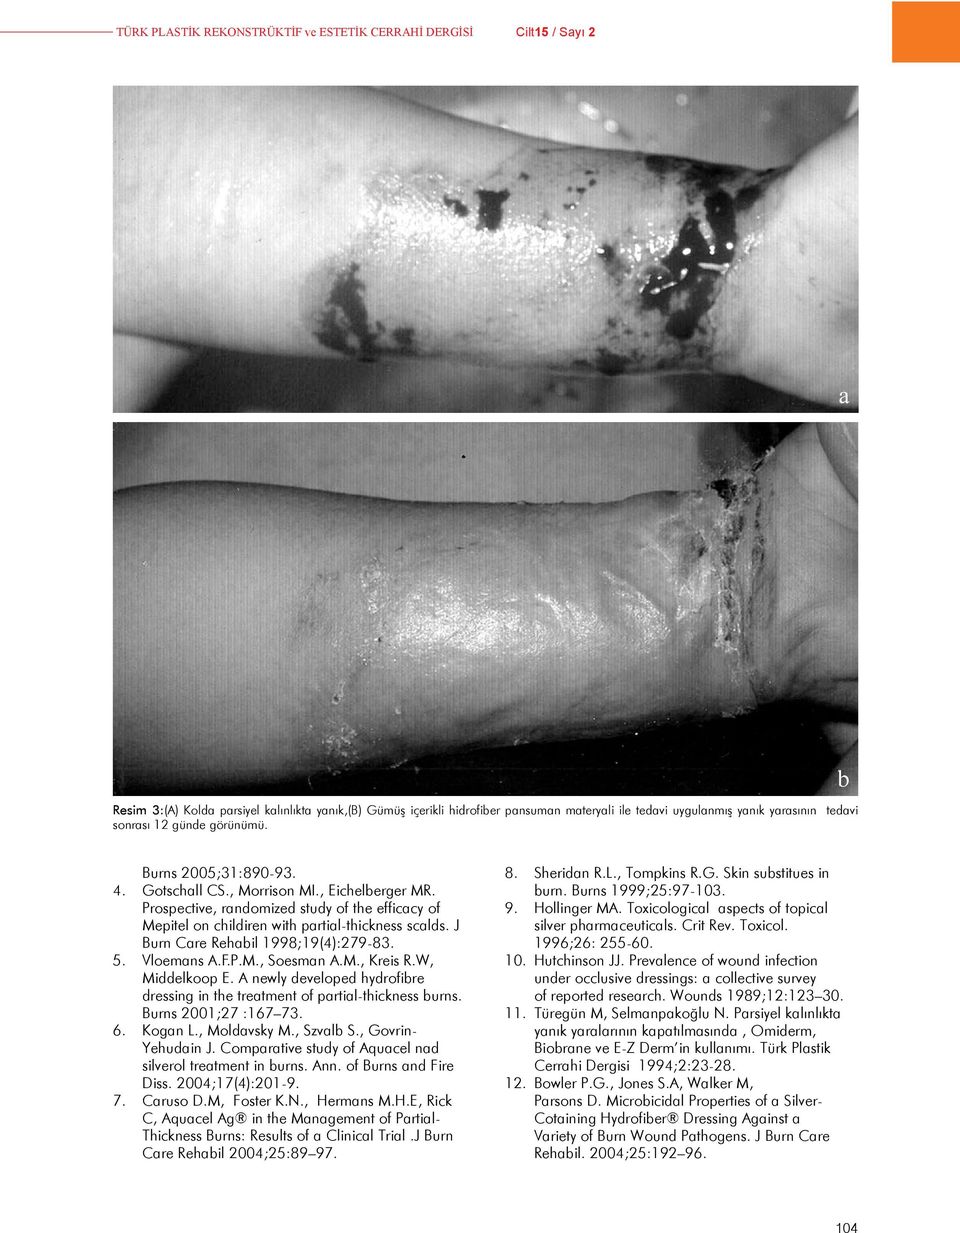 J Burn Care Rehabil 18;1(4):7-8.. Vloemans A.F.P.M., Soesman A.M., reis R.W, Middelkoop. A newly developed hydrofibre dressing in the treatment of partial-thickness burns. Burns 001;7 :167 7. 6.